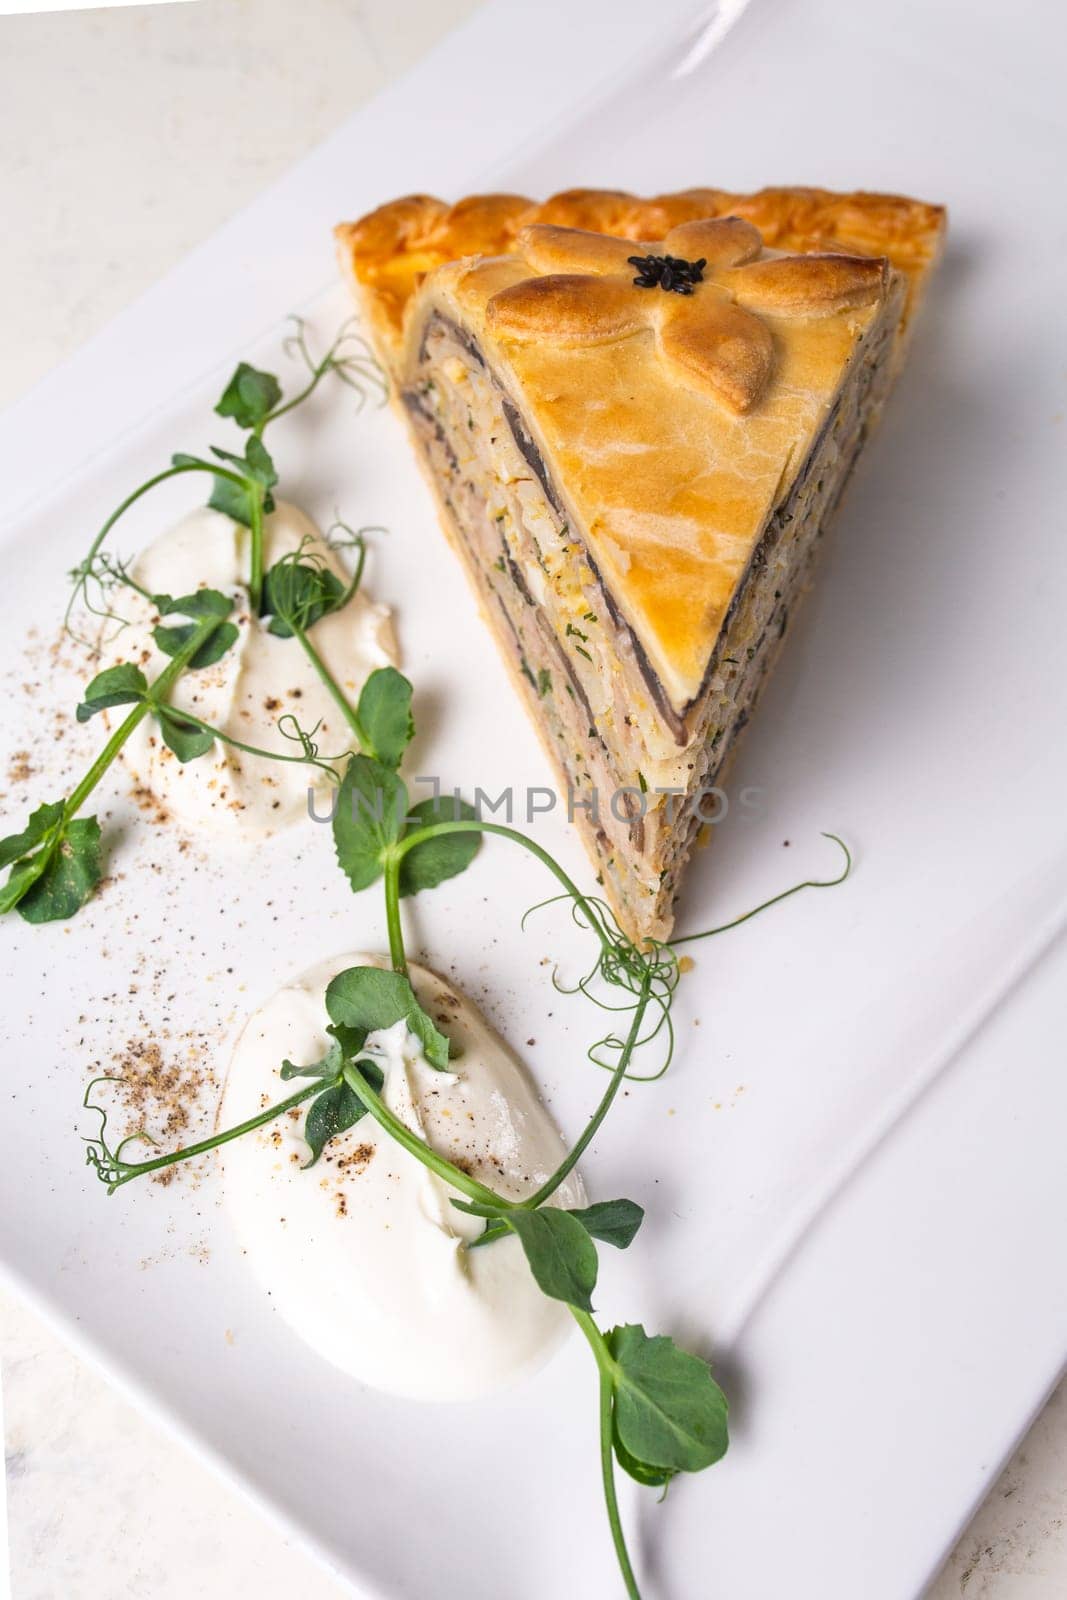 Multi-layered meat and vegetable savory pie with a golden crust by Pukhovskiy